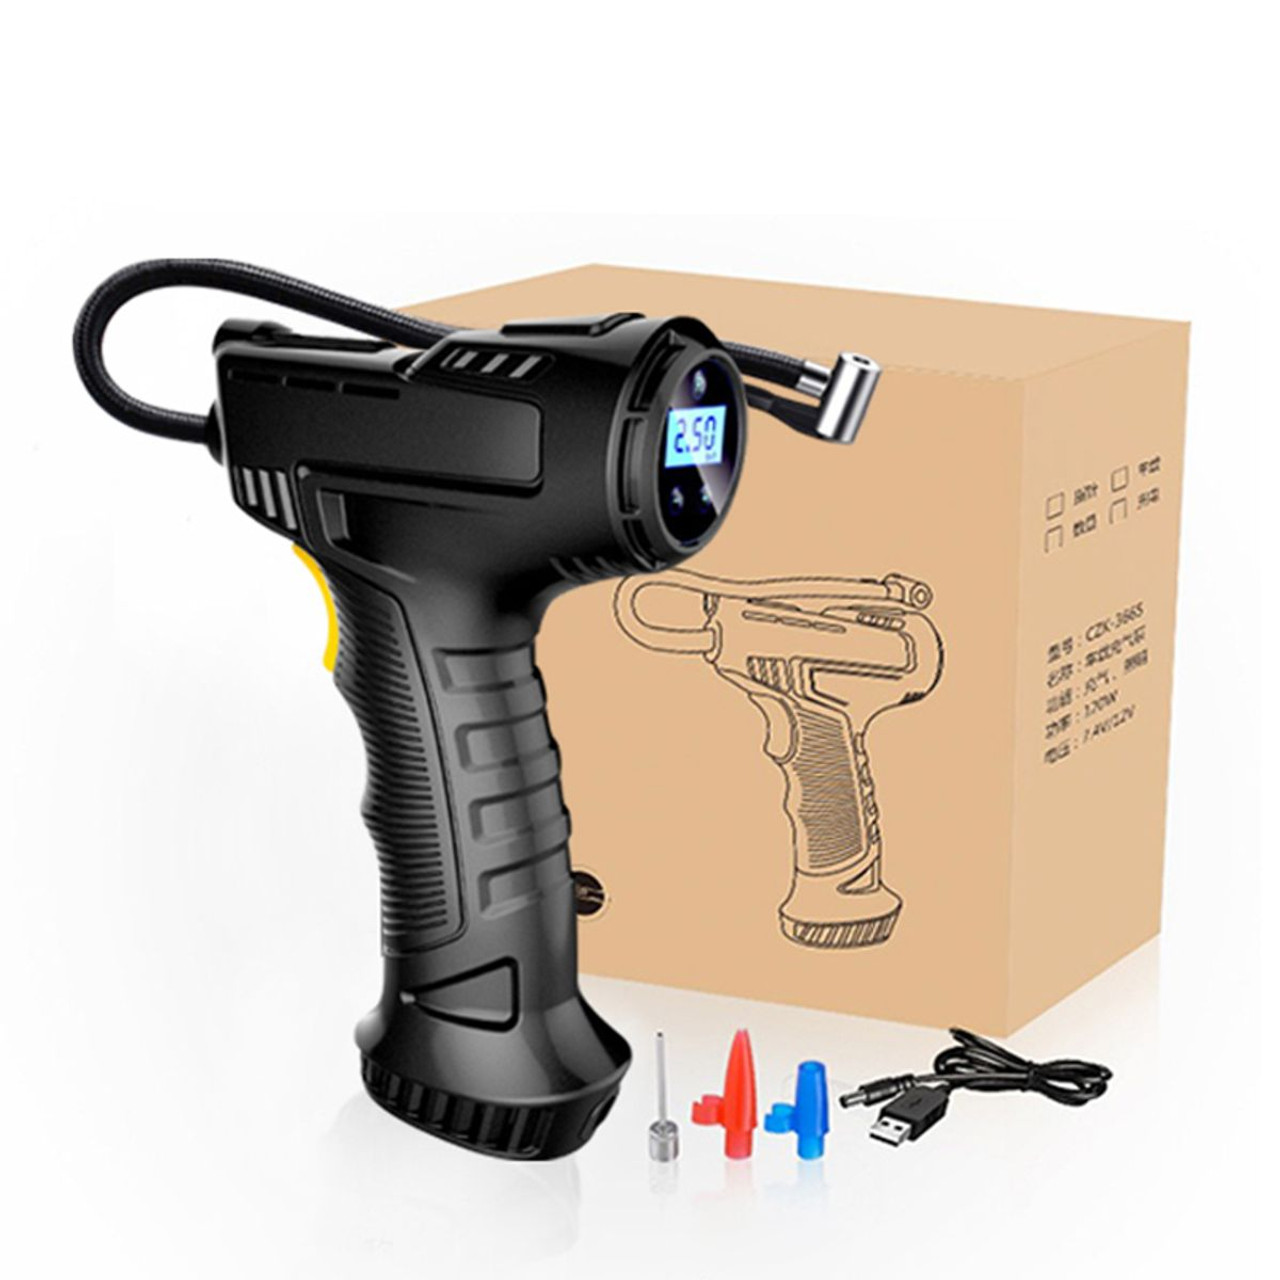 120W Handheld Wireless Air Compressor product image